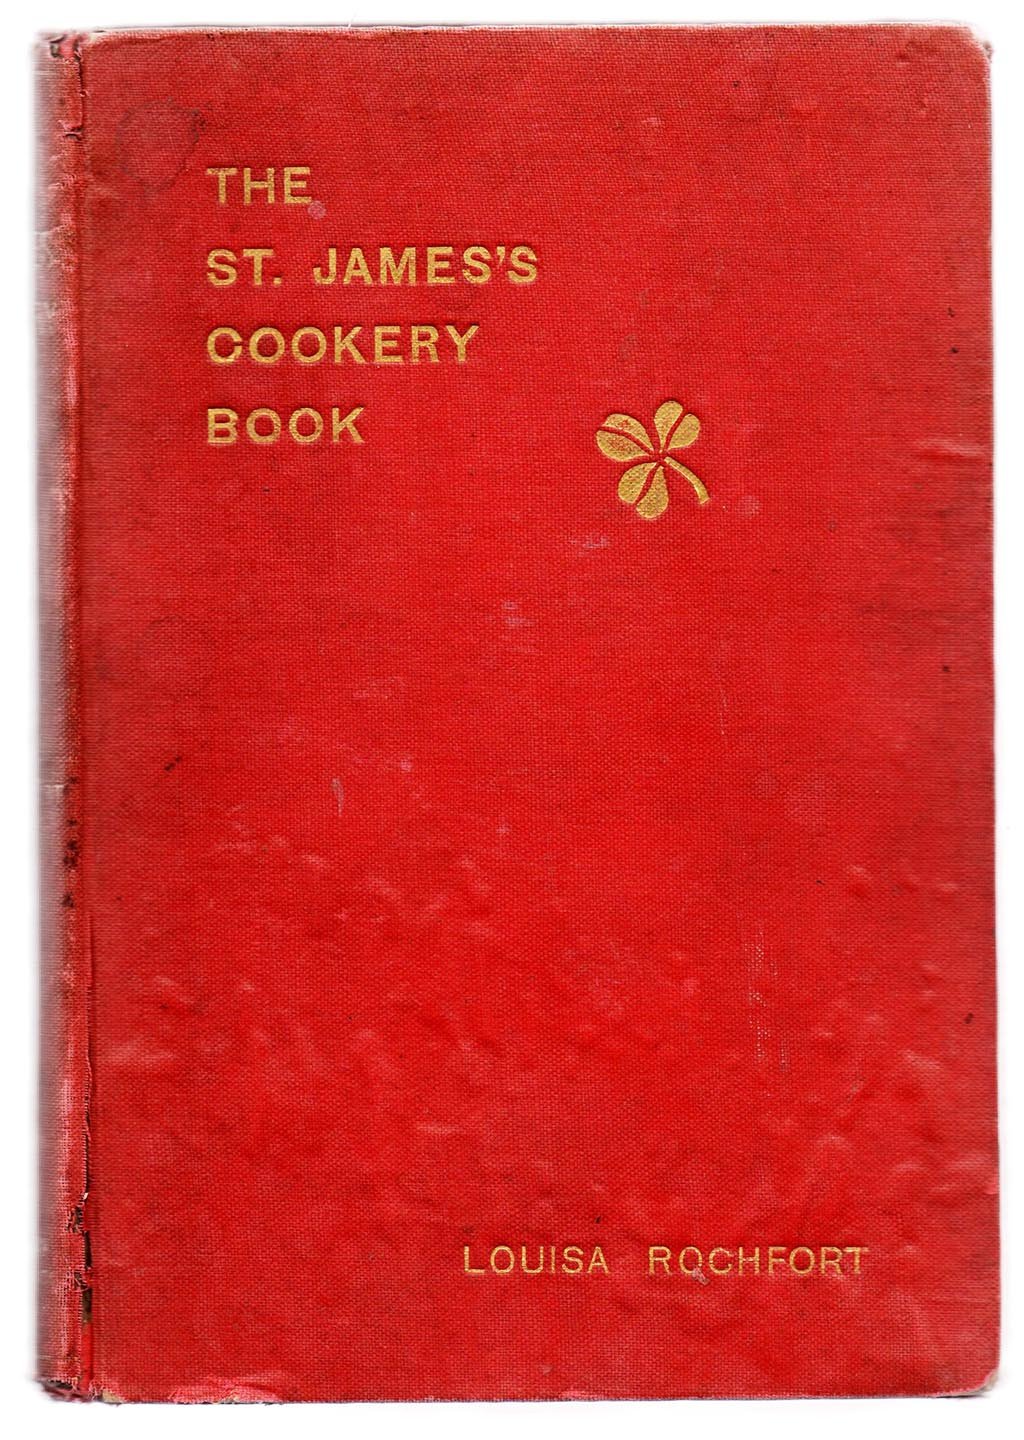 The St. James's Cookery Book